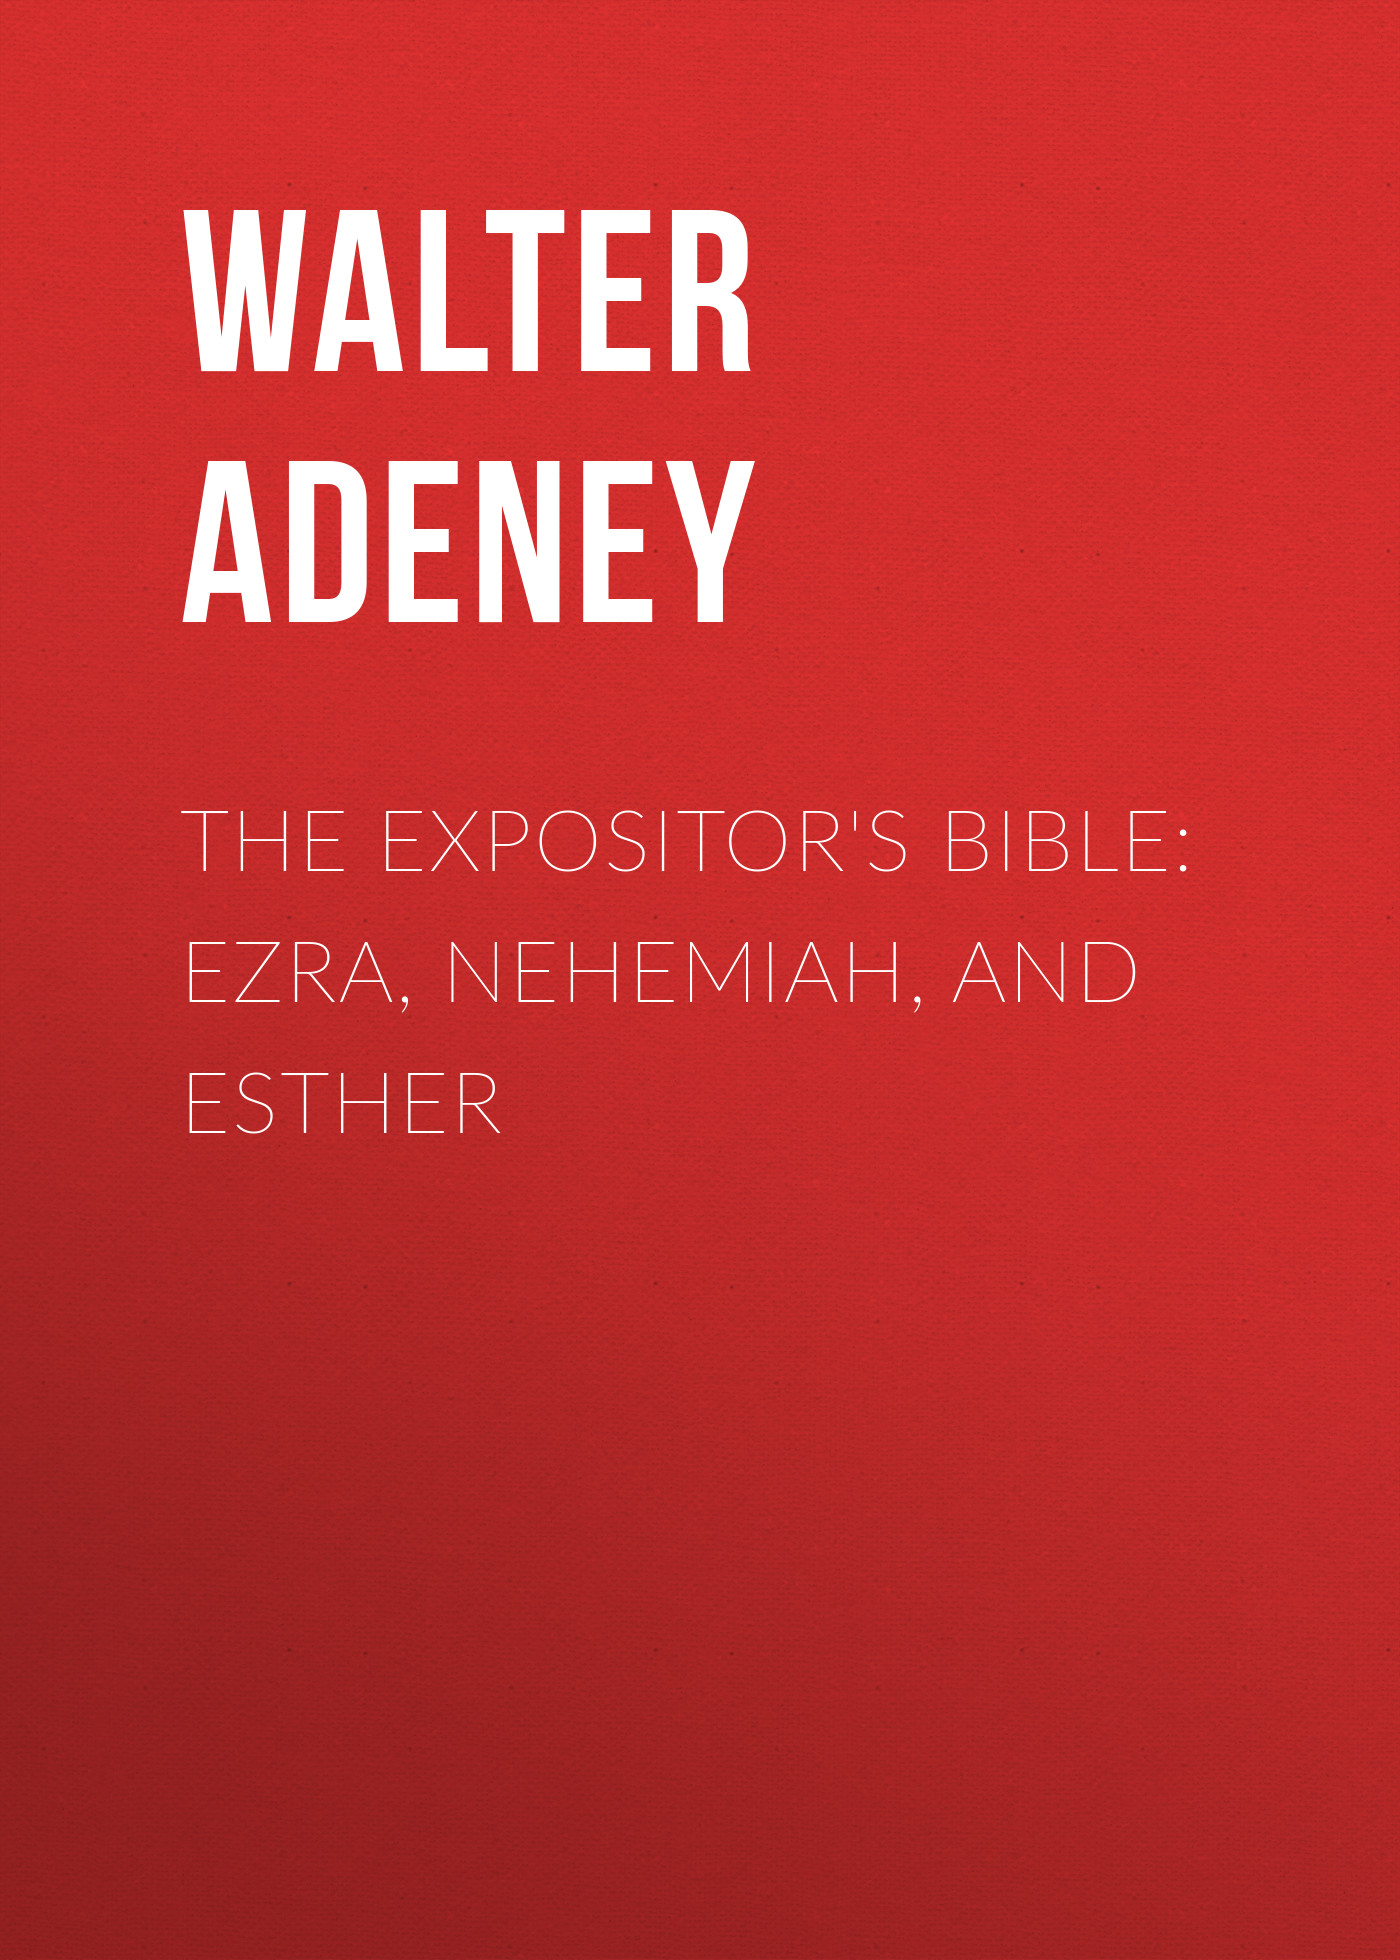 The Expositor's Bible: Ezra, Nehemiah, and Esther